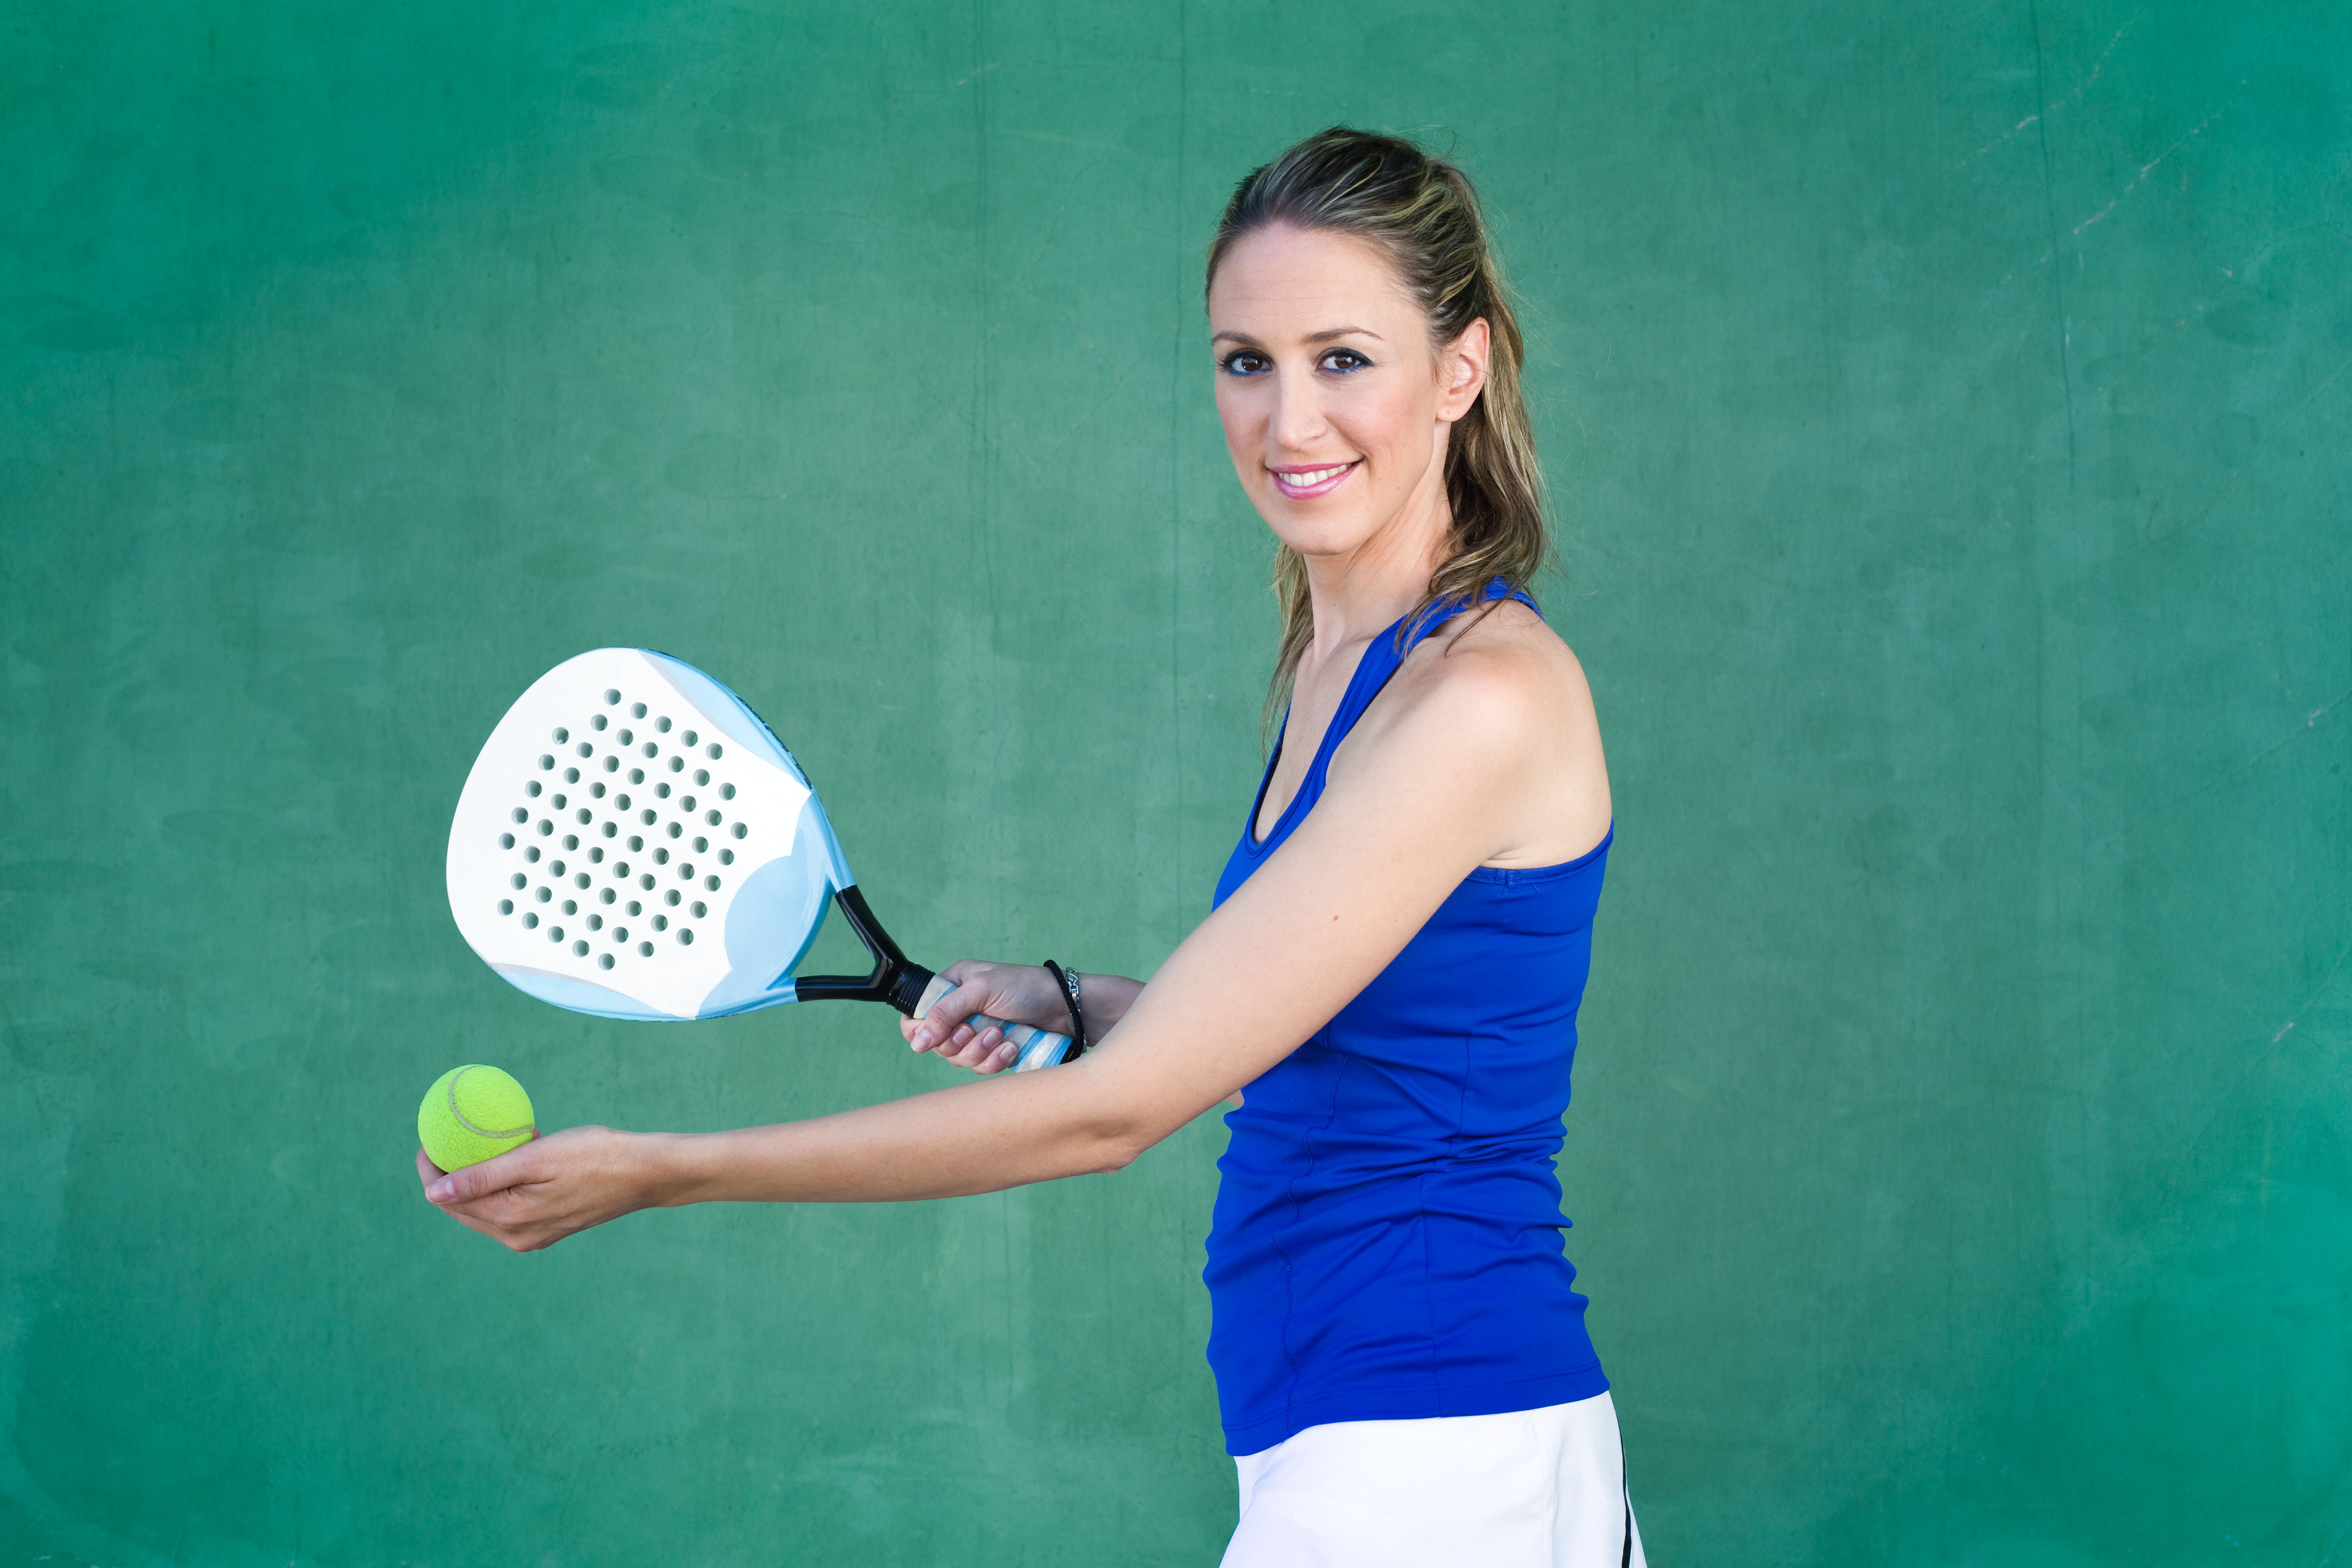 Padel vs Pickleball - What's the Difference?